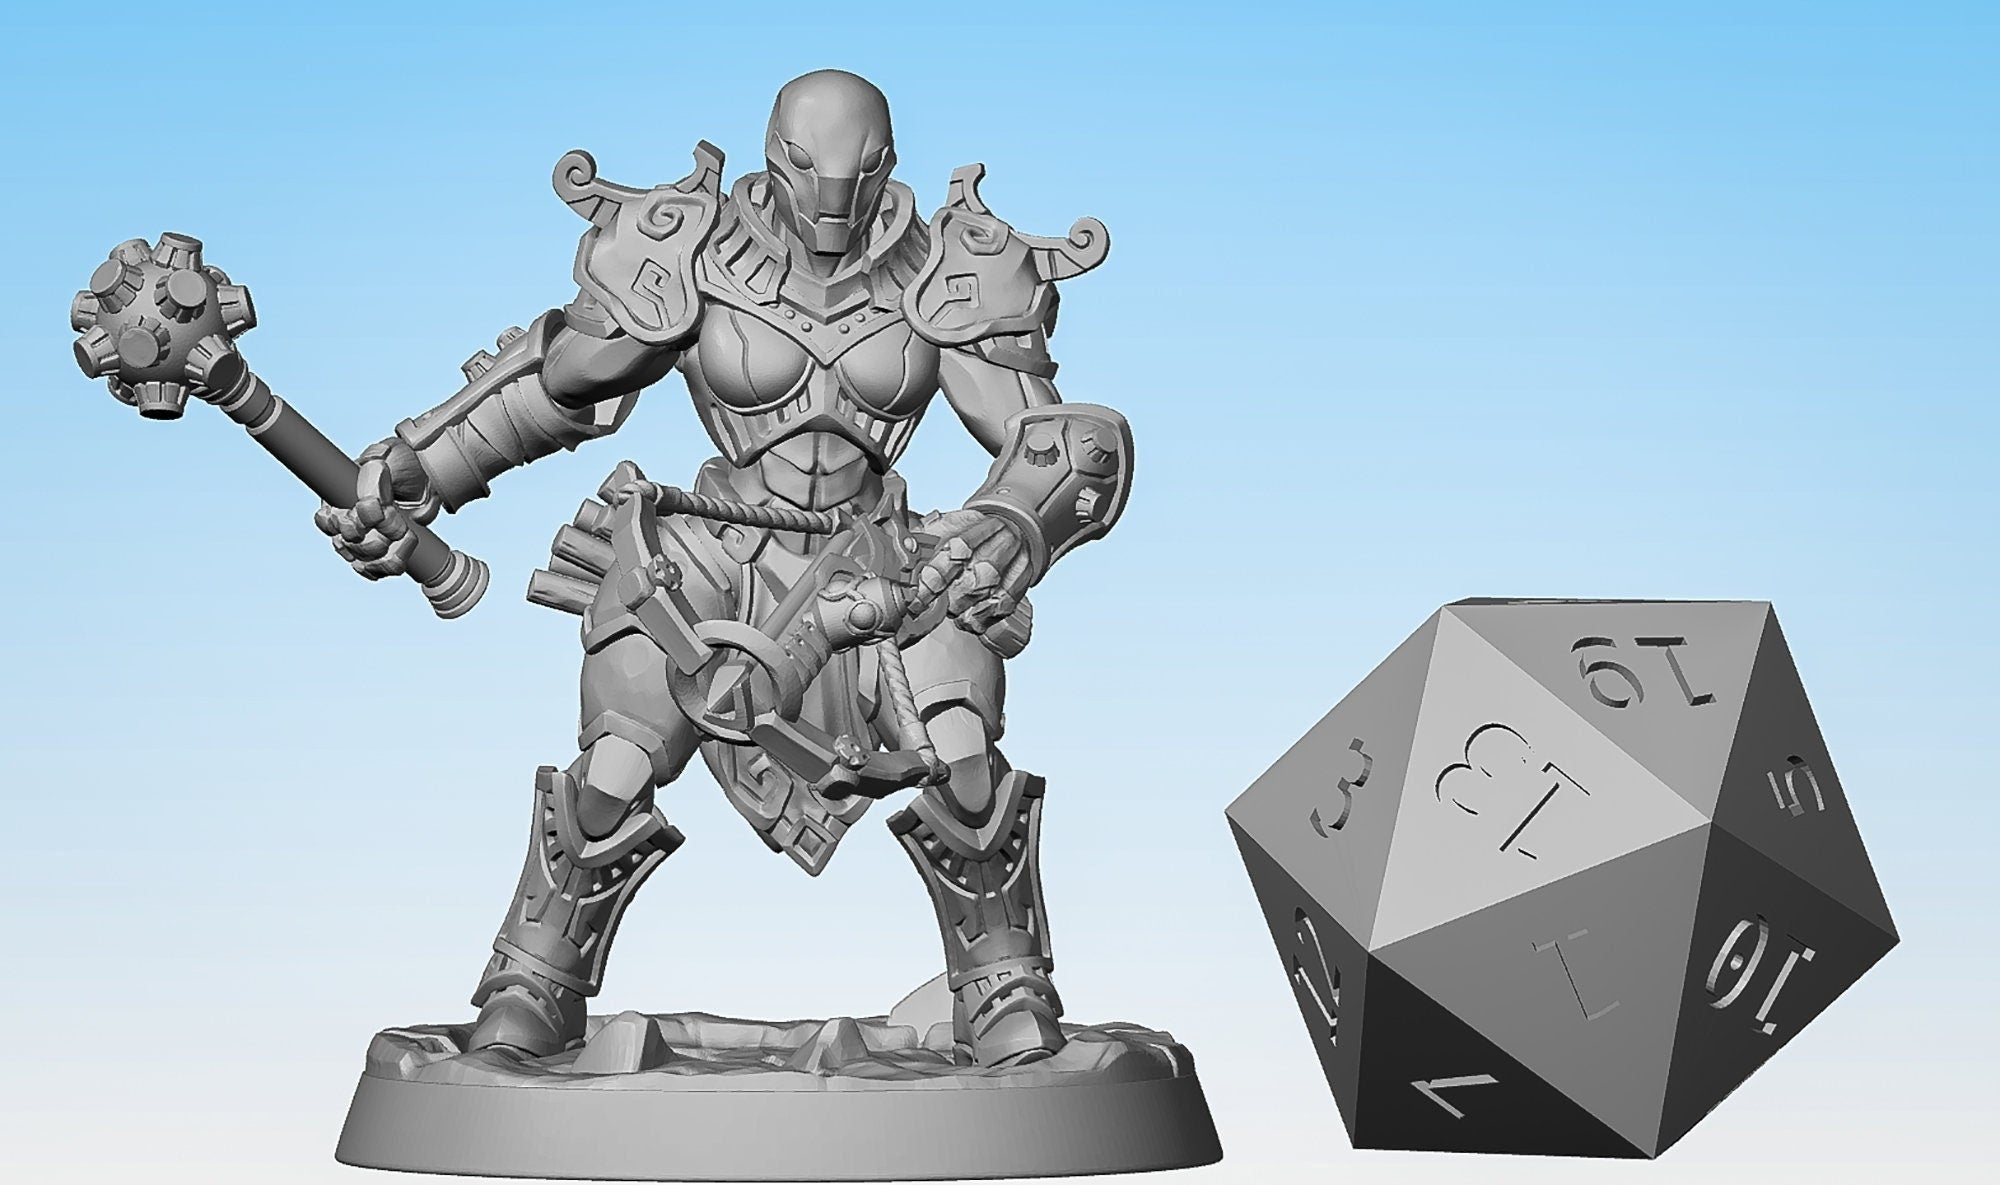 WARFORGED "Golem Simulacrum Troop D" (Mace & Crossbow)-Role Playing Miniatures